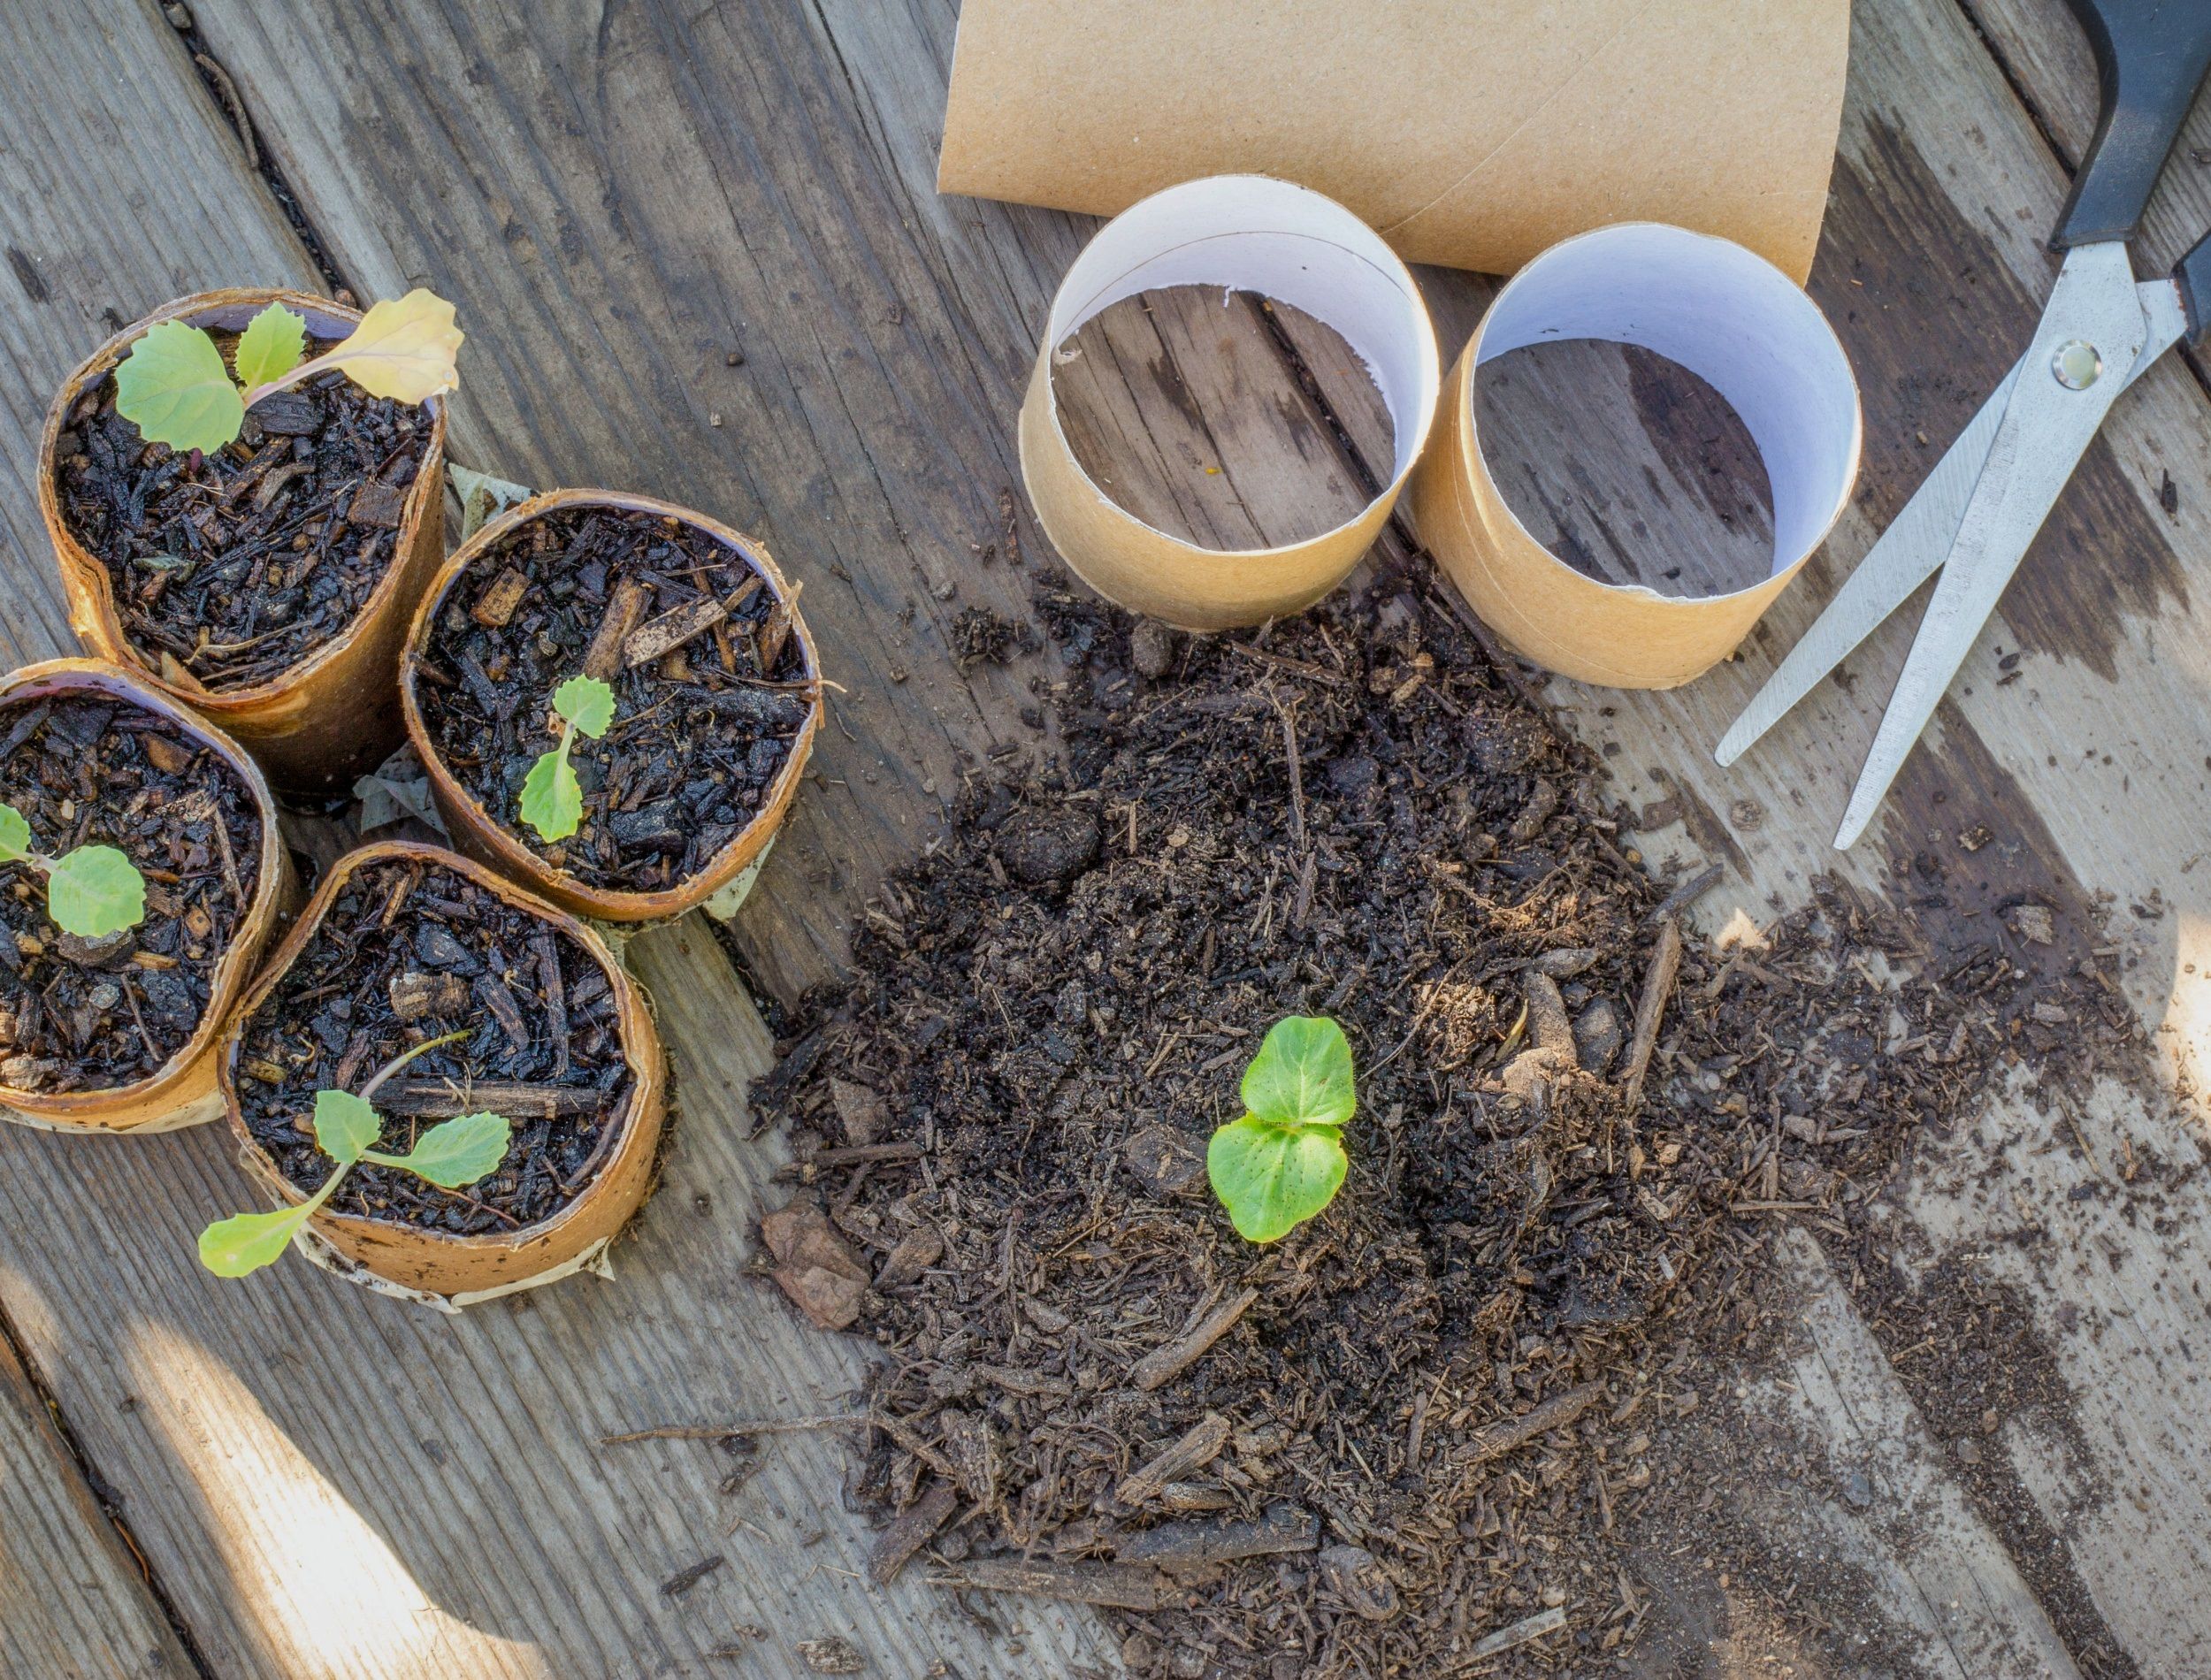 top view of toilet paper roll tubes being recycled as a seedling planters, seedlings being potted into cardboard toilet paper rolls outside on garden bench. Save money, recycle and grow your own food.